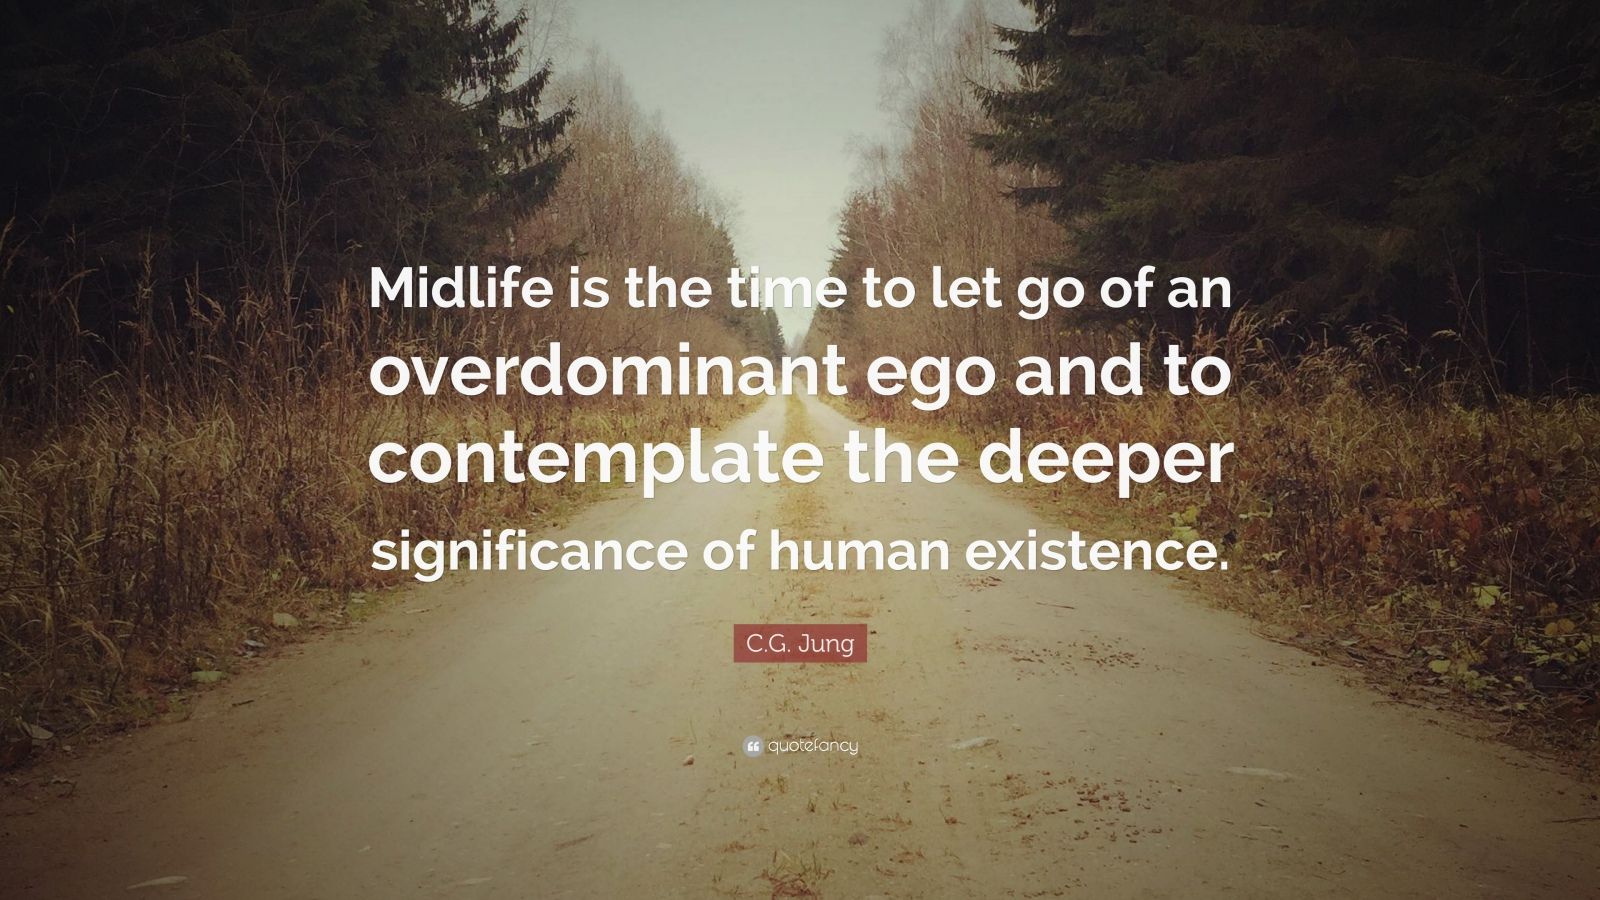 C.G. Jung Quote: “Midlife is the time to let go of an overdominant ego ...